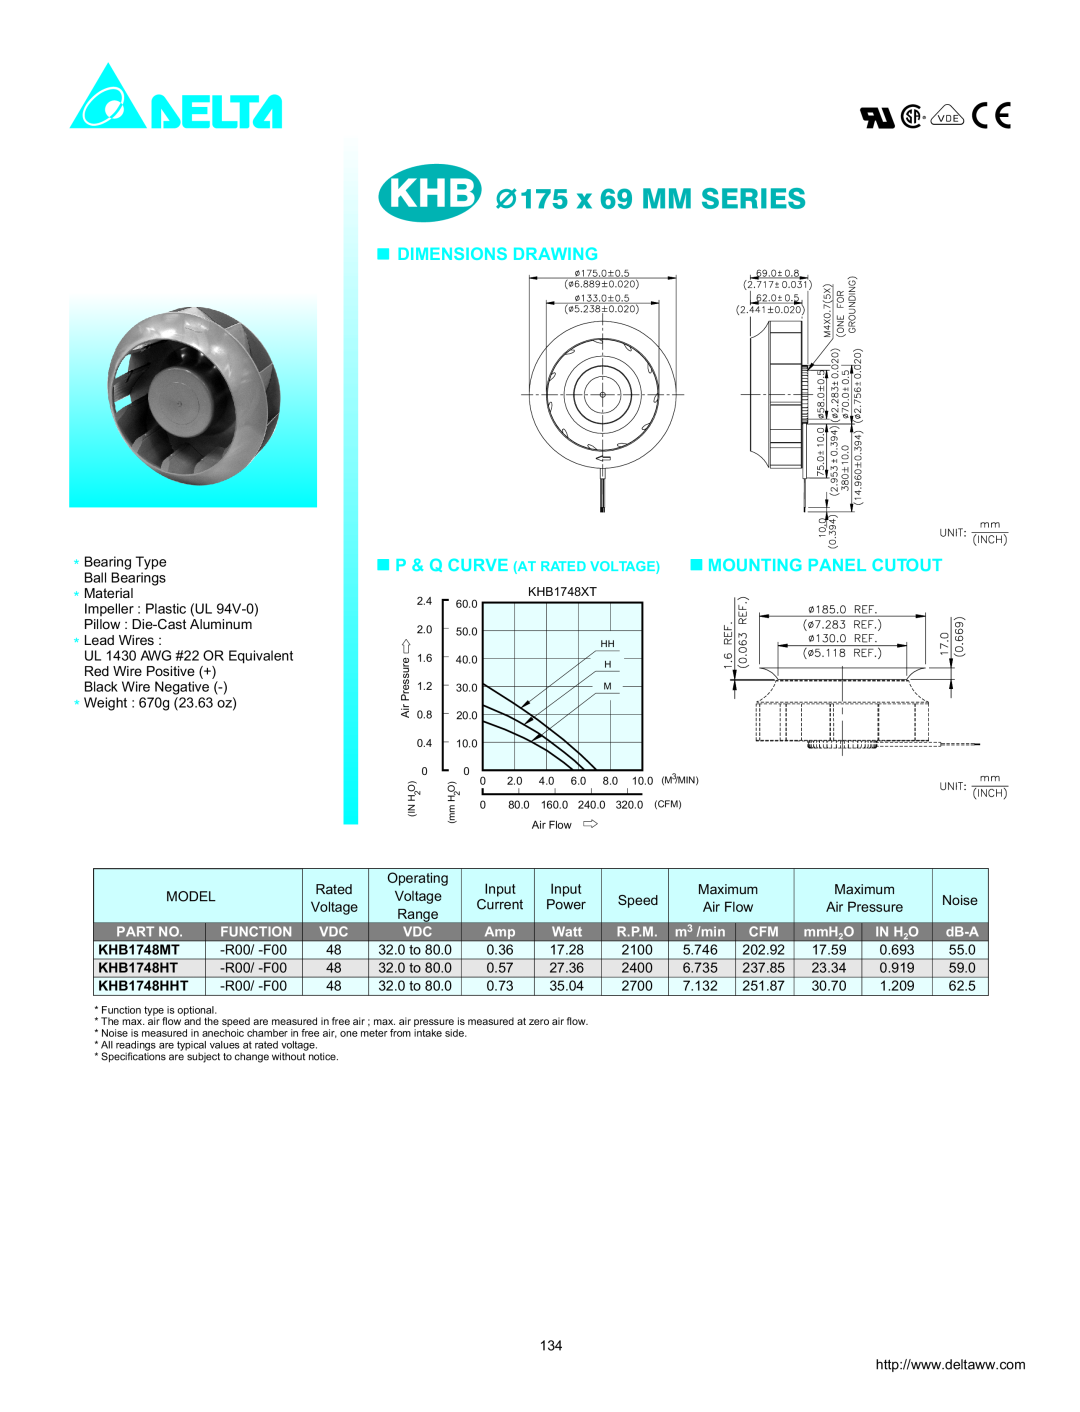 Delta Electronics KHB1748HHT dimensions Dimensions Drawing, Mounting Panel Cutout, P & Q Curve At Rated Voltage, Function 